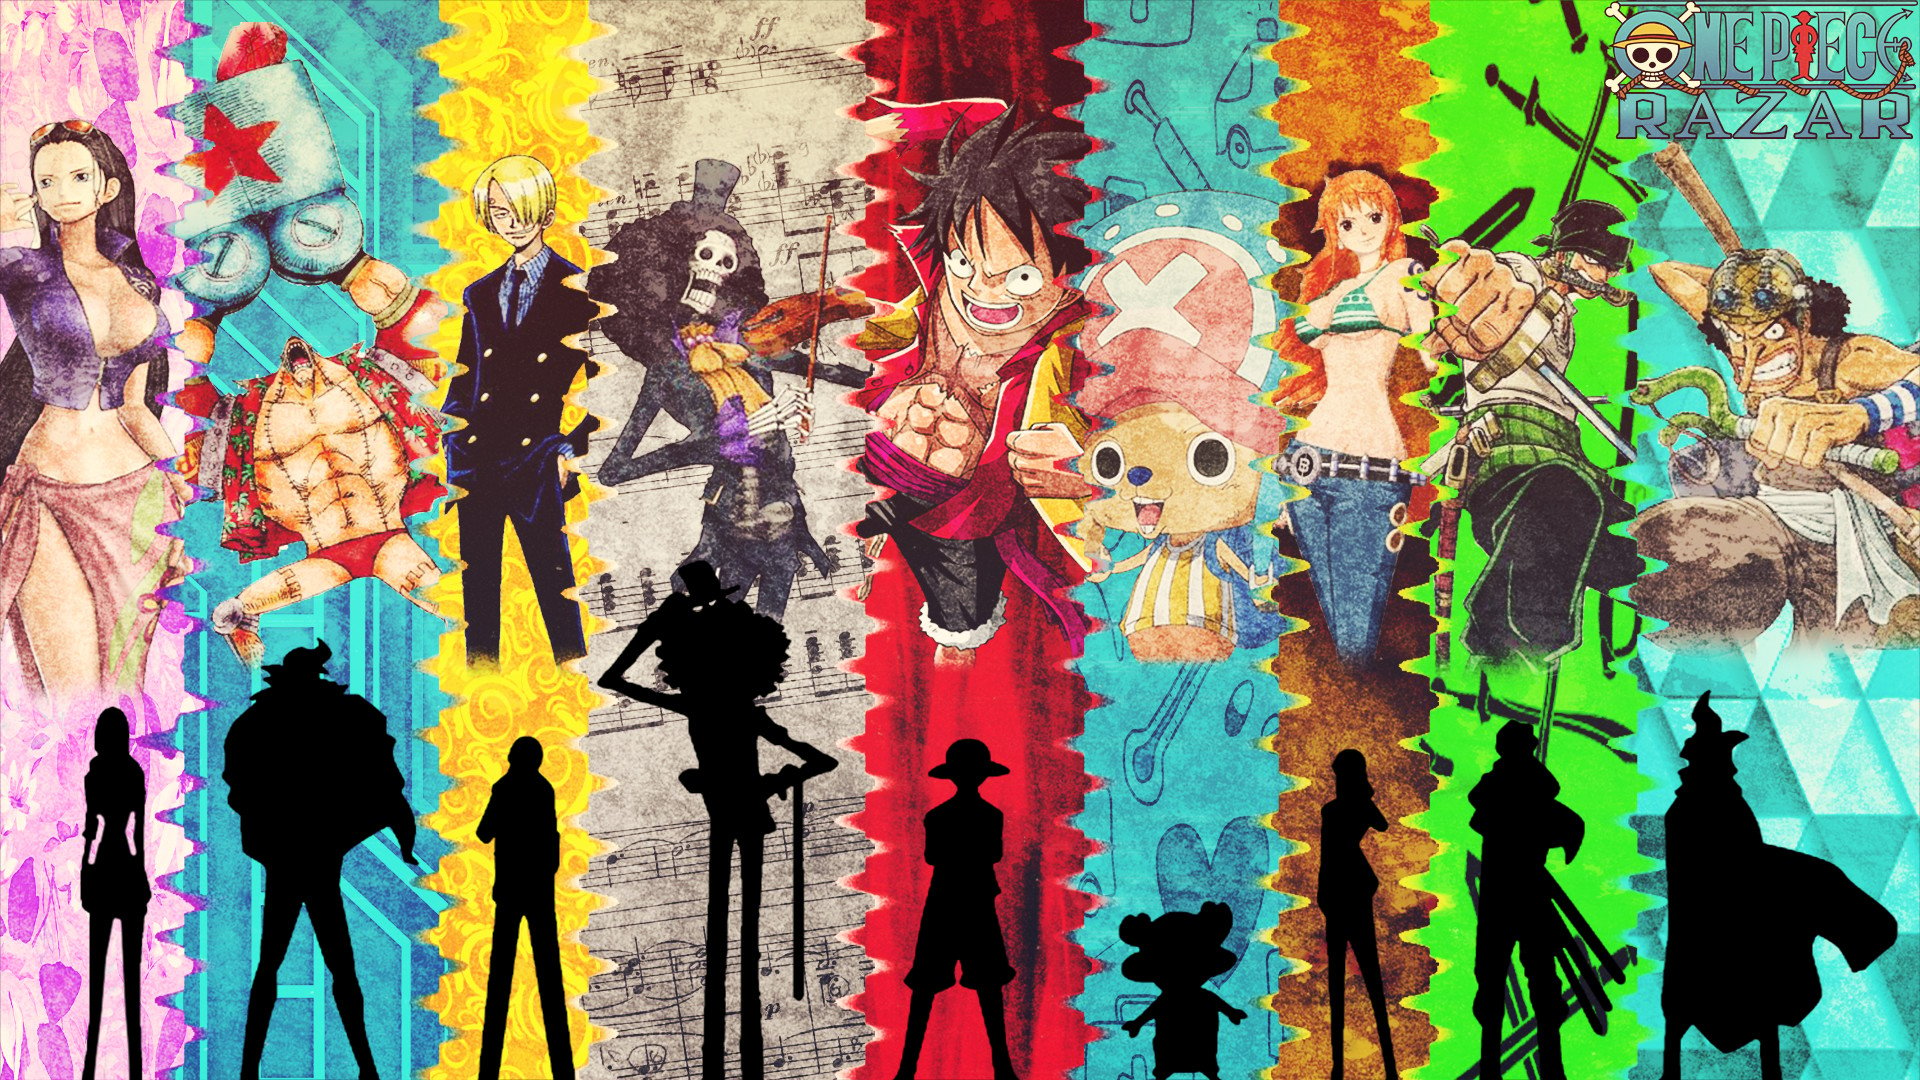 One Piece Minimalist Wallpapers Wallpaper Cave